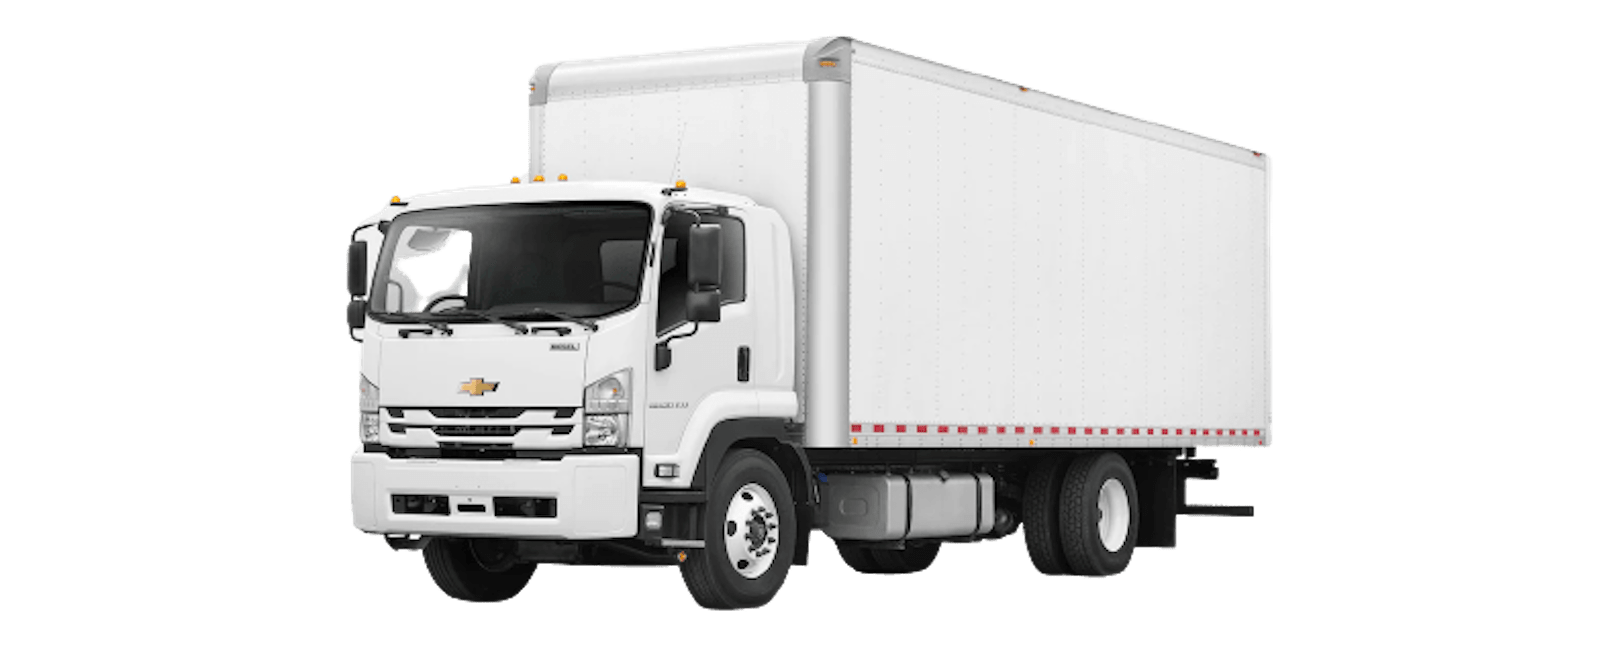 Angled white Chevy Low Cab Forward box truck